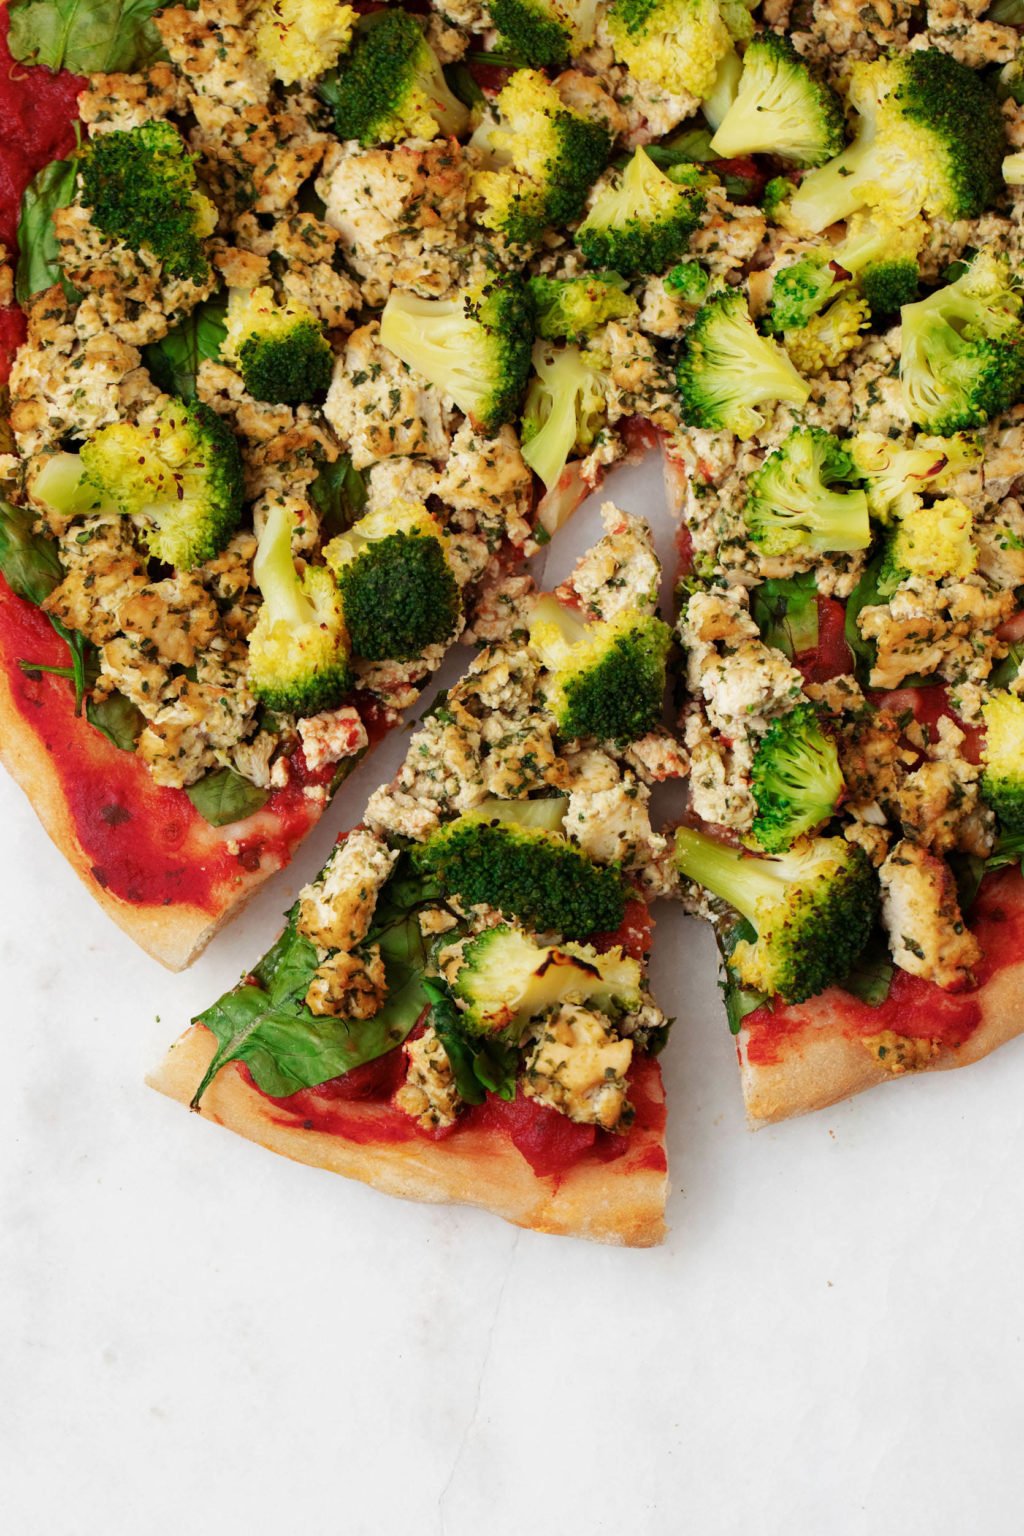 A slice of pizza has been cut out of a round pie. The pizza is topped with green vegetables and tofu.